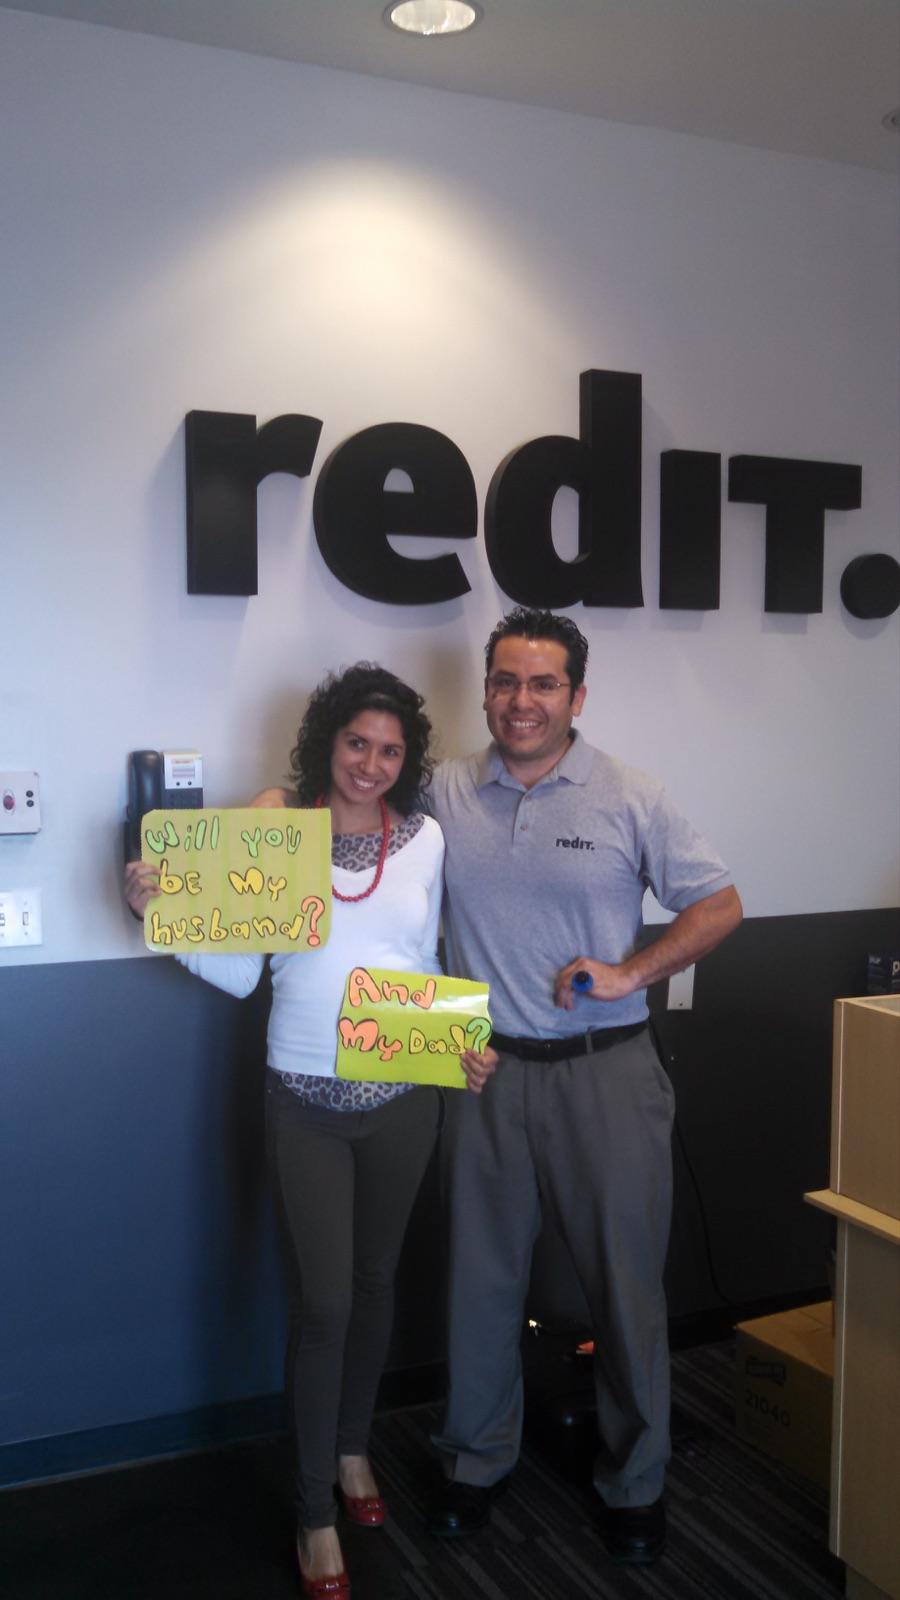 redIT employee gets engaged at work!